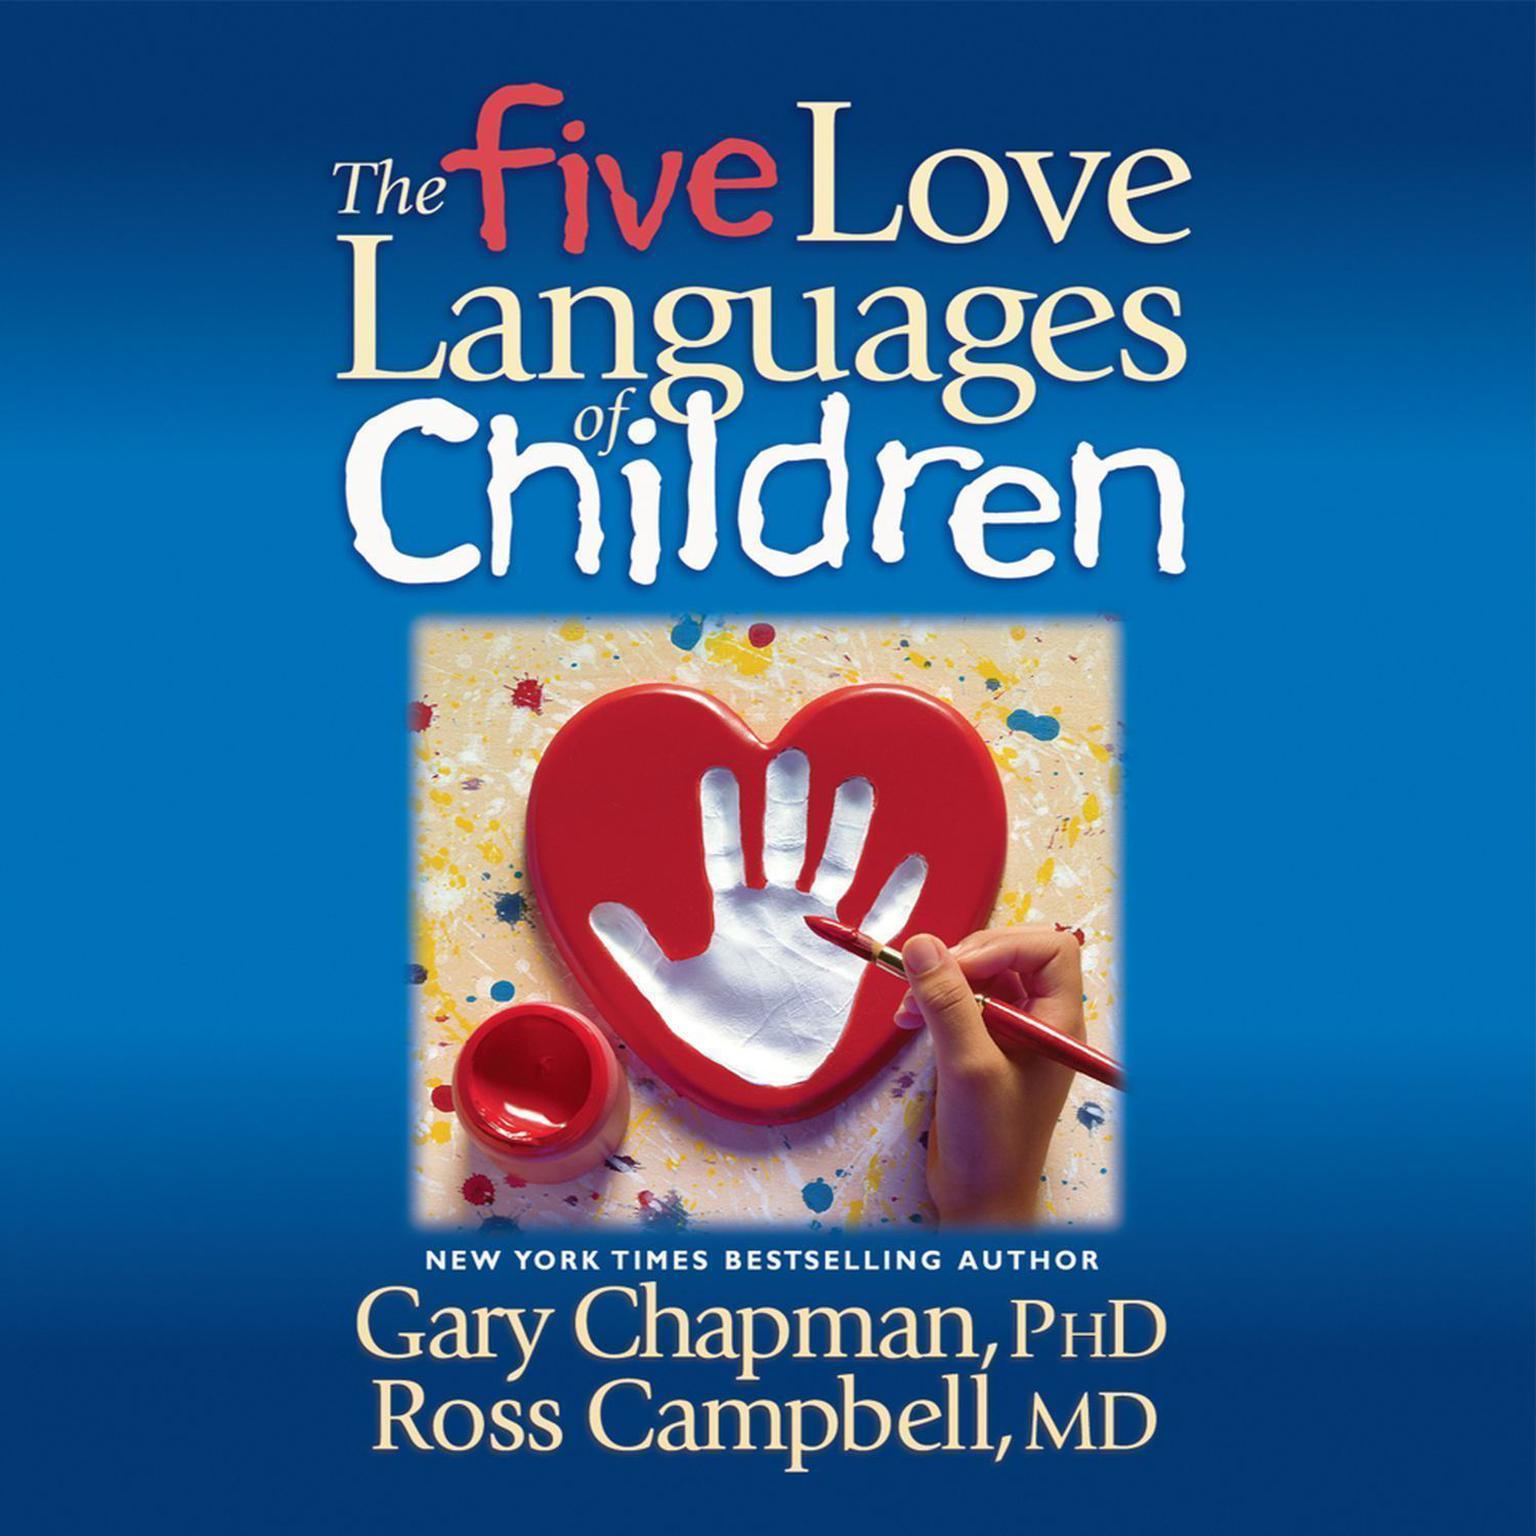 The Five Love Languages of Children Audiobook by Gary Chapman